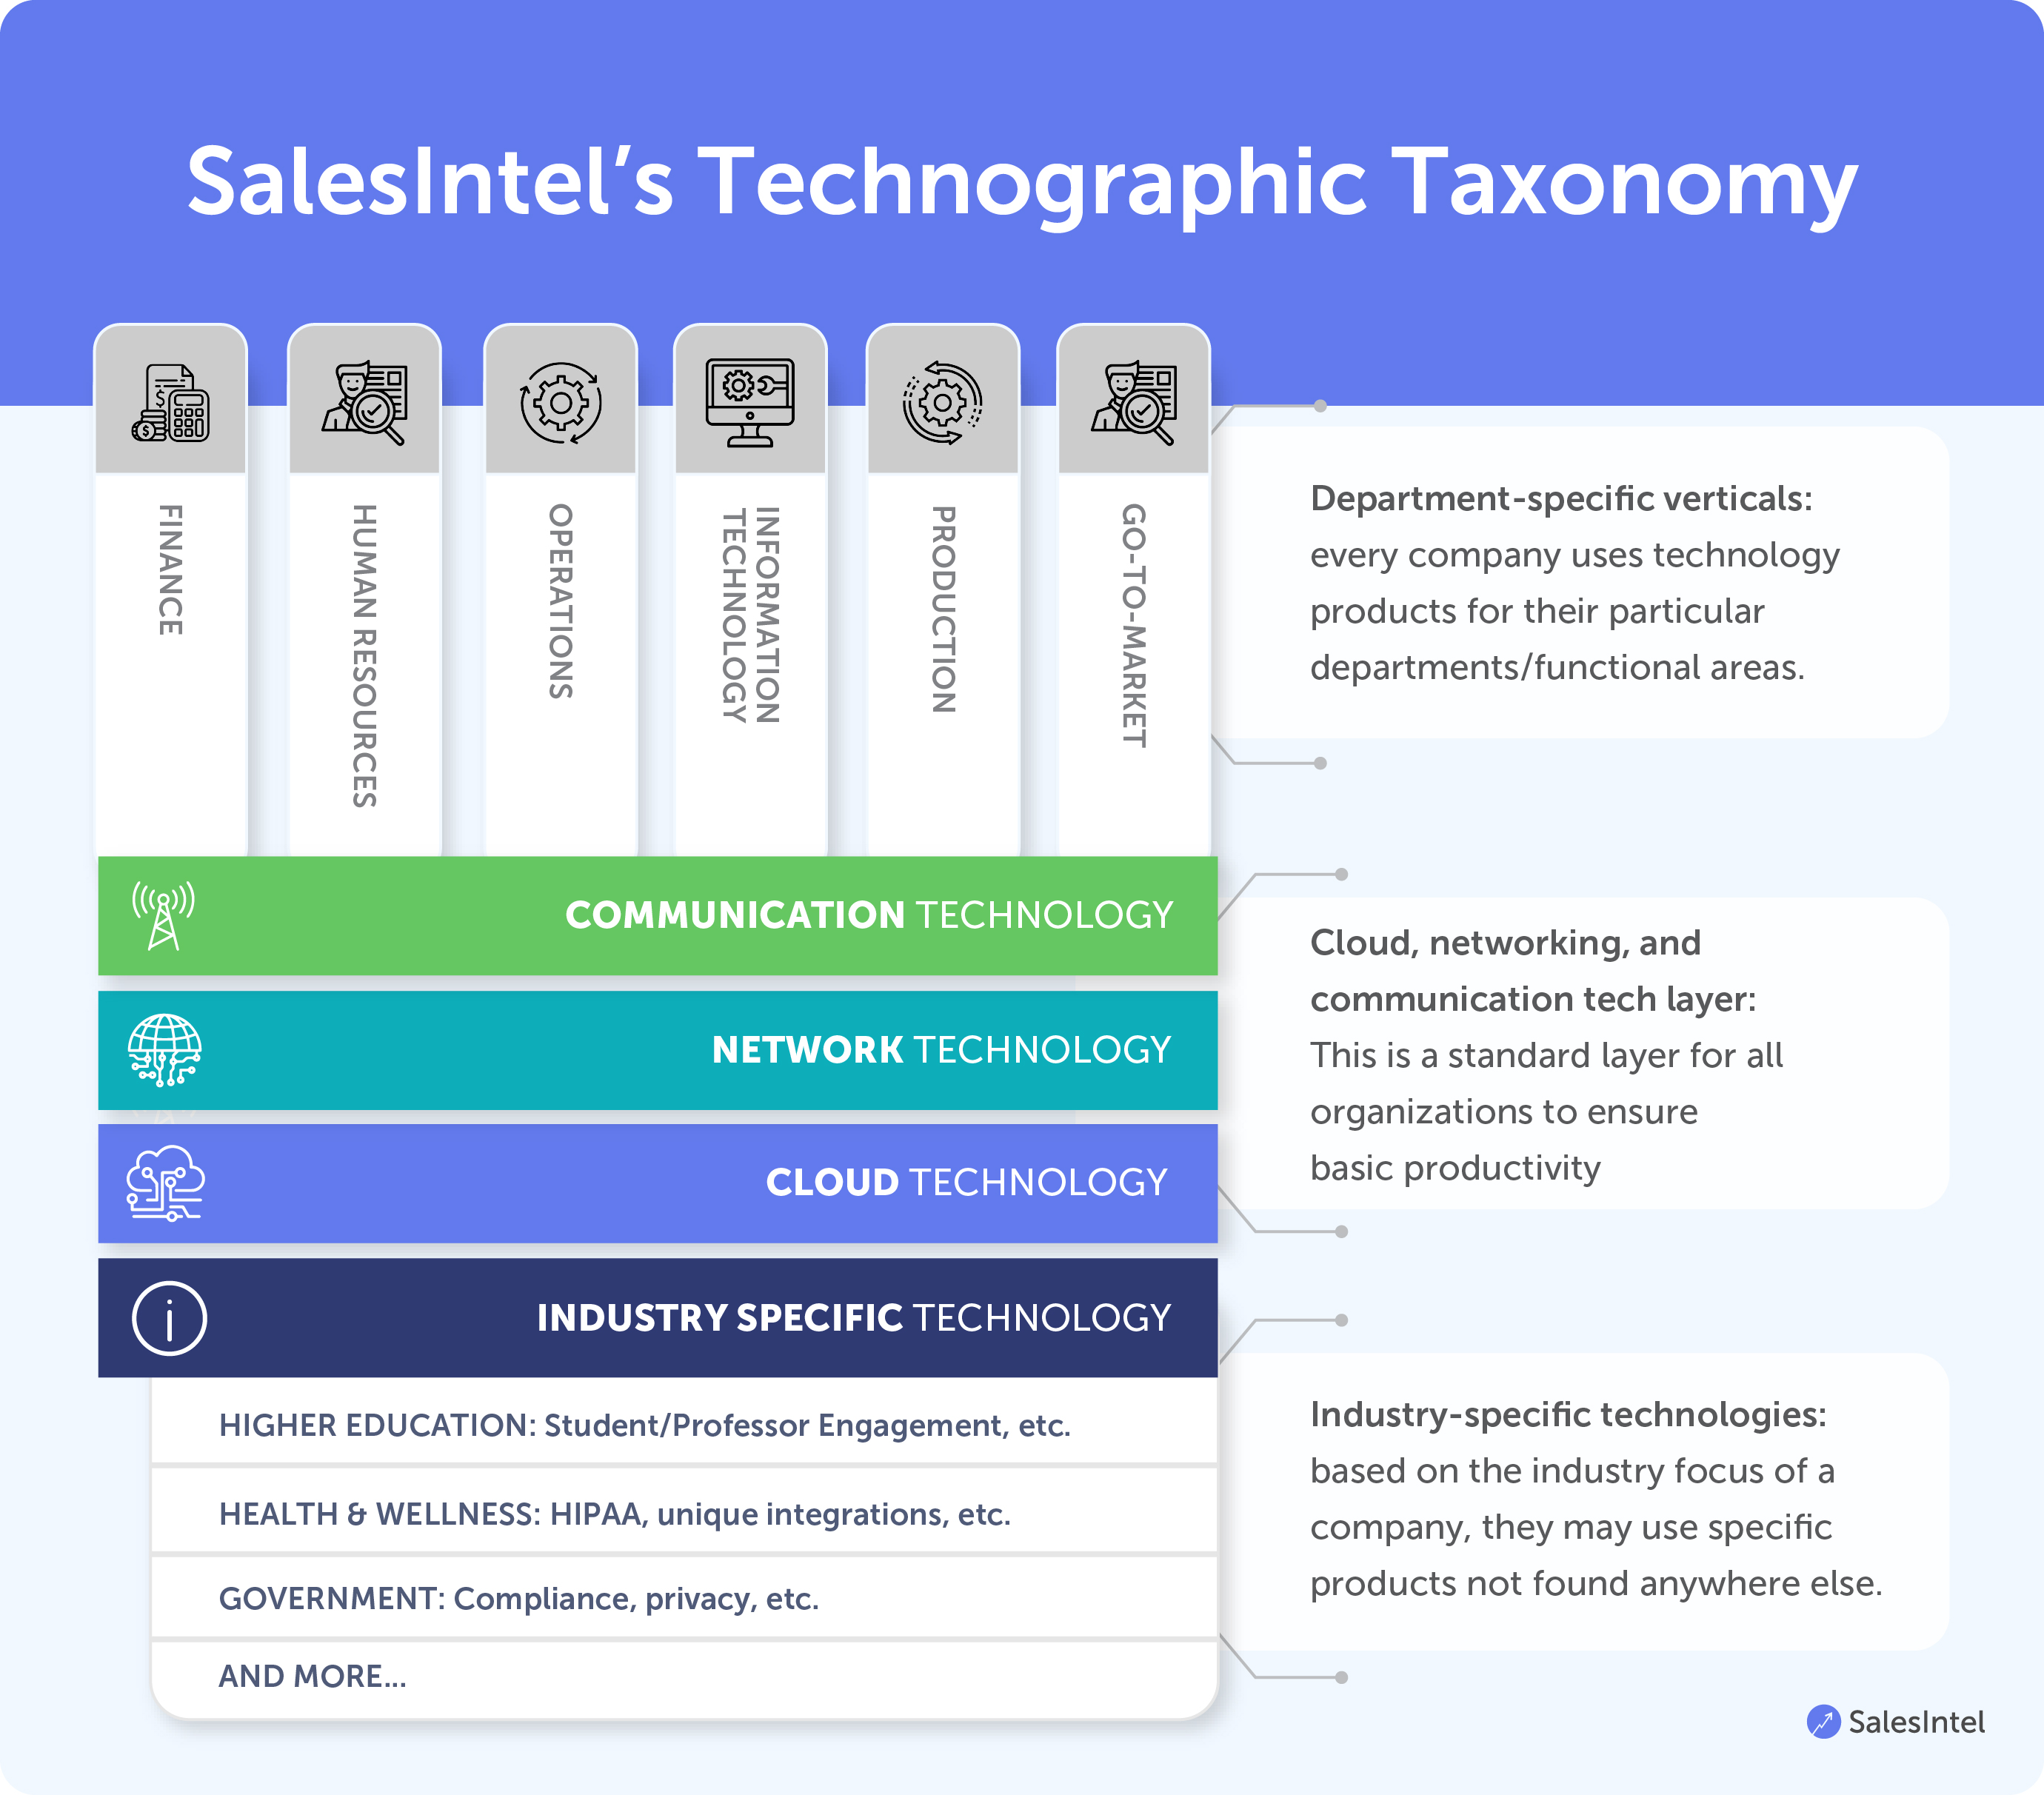 How SalesIntel structured thier intuitive technographic taxonomy for Modern B2B revenue leaders.